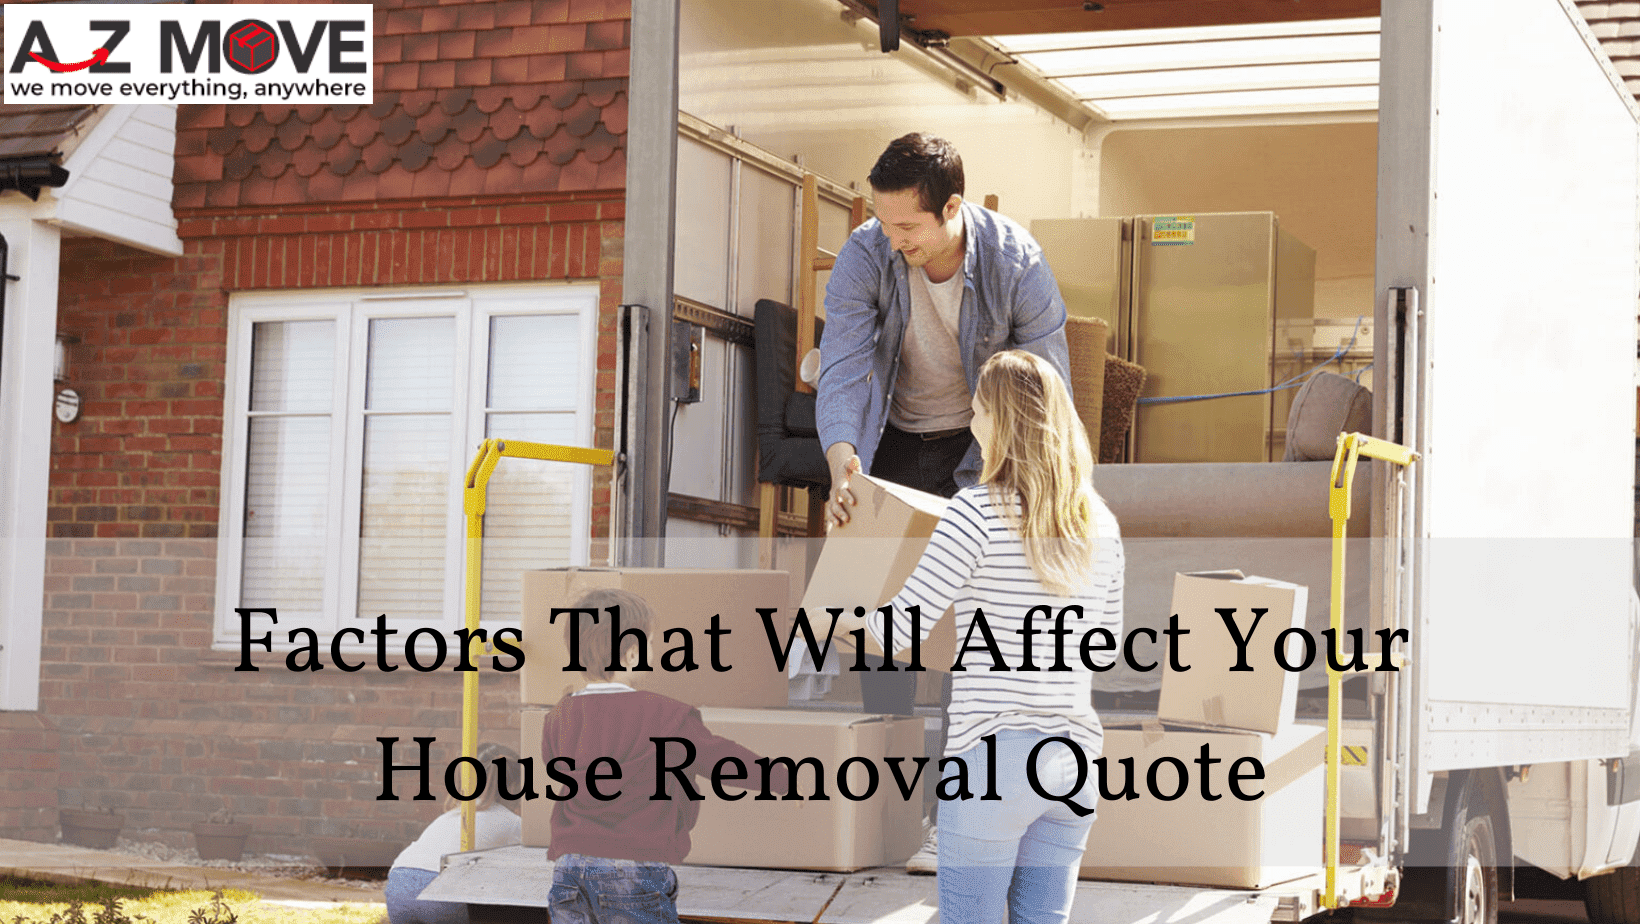 Factors That Will Affect Your House Removal Quote (1) (1)-ca8c2be5